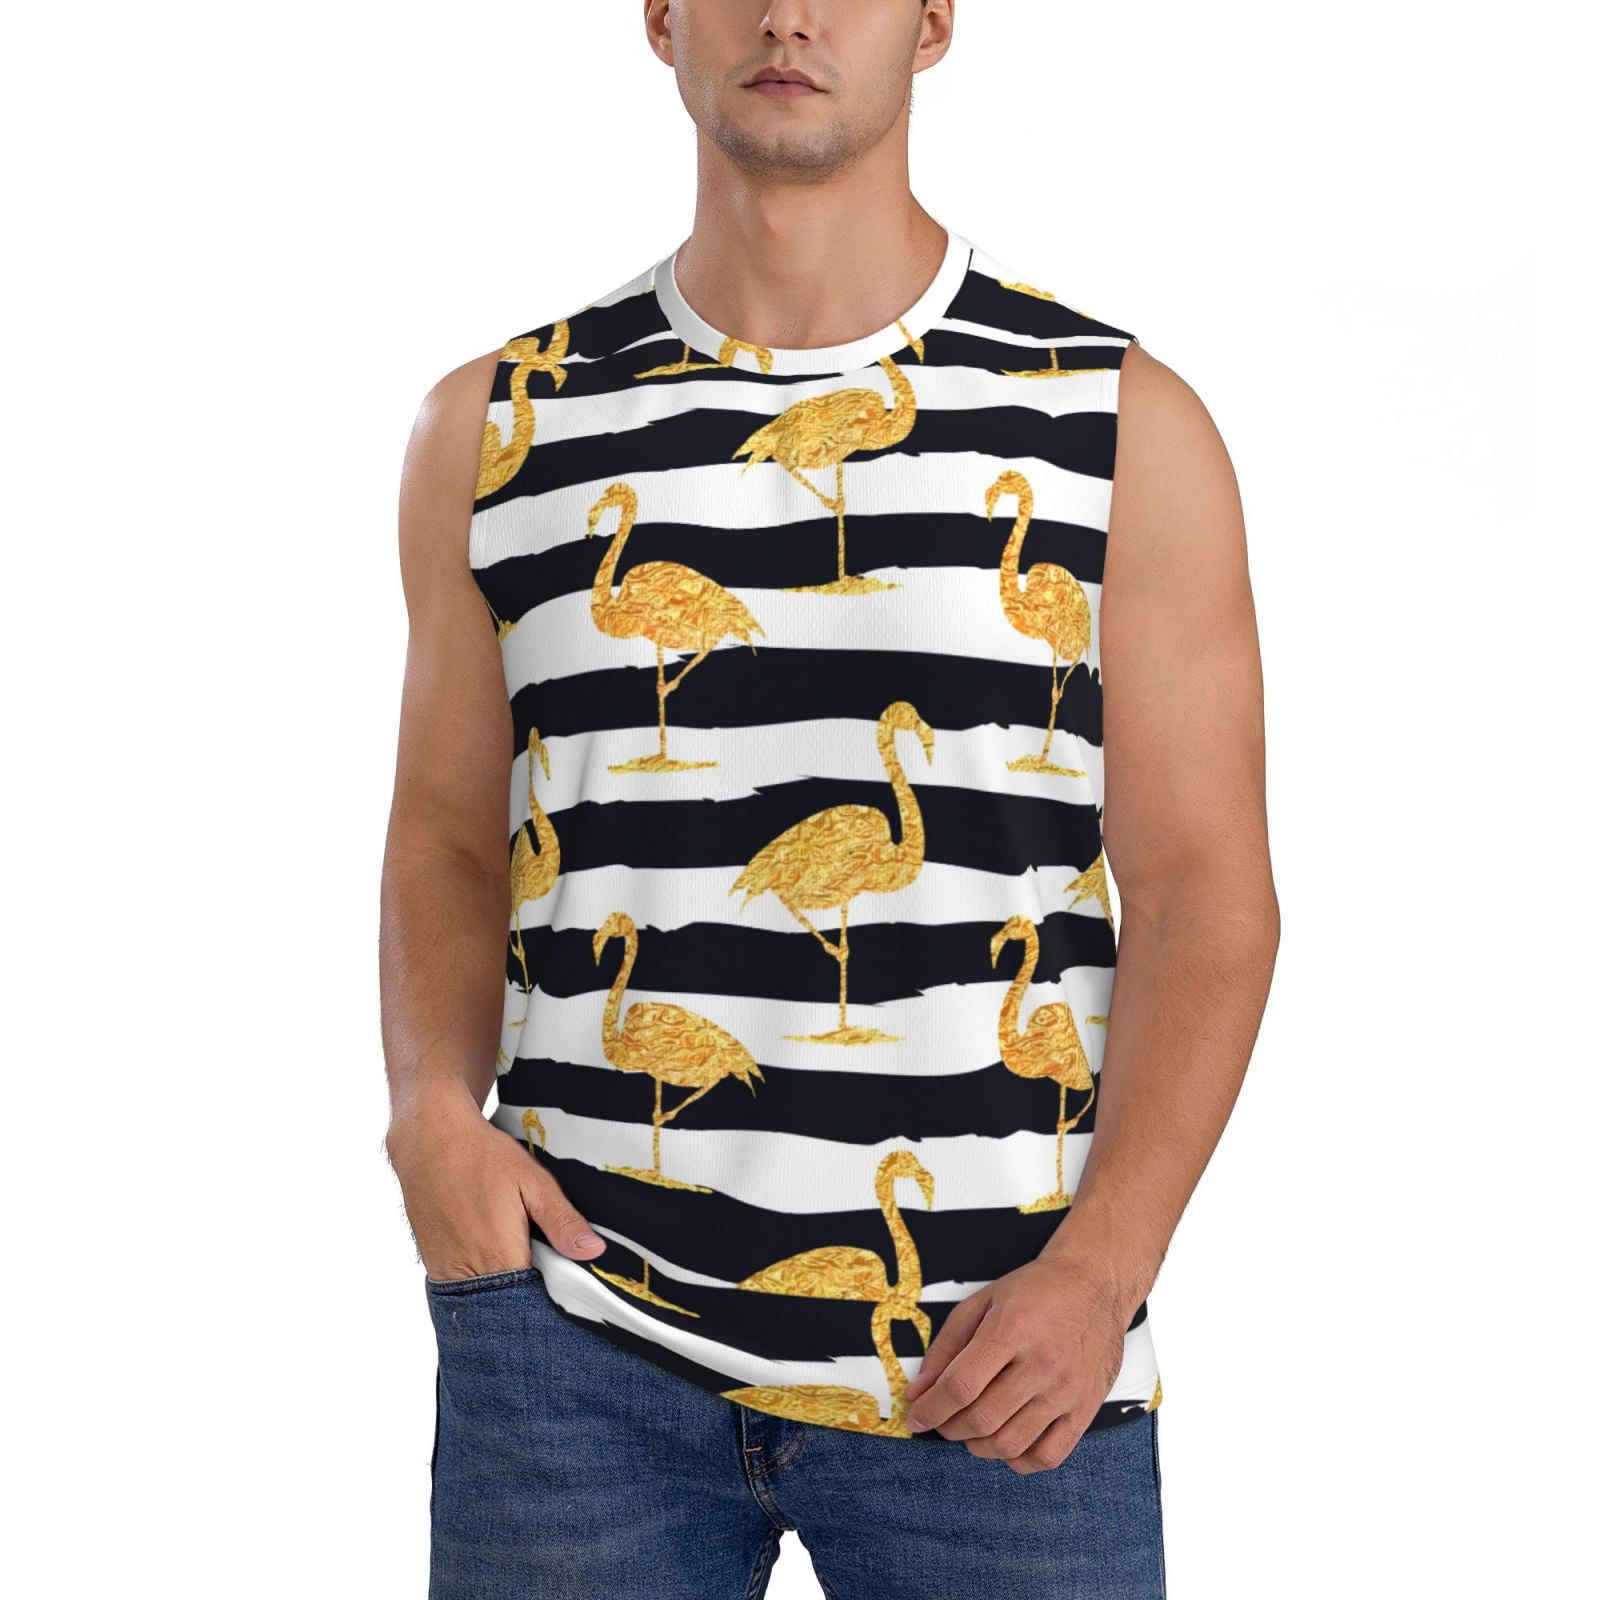 Disketp Gold Flamingo Sleeveless Tshirts For Men, Muscle Shirts For Men ...